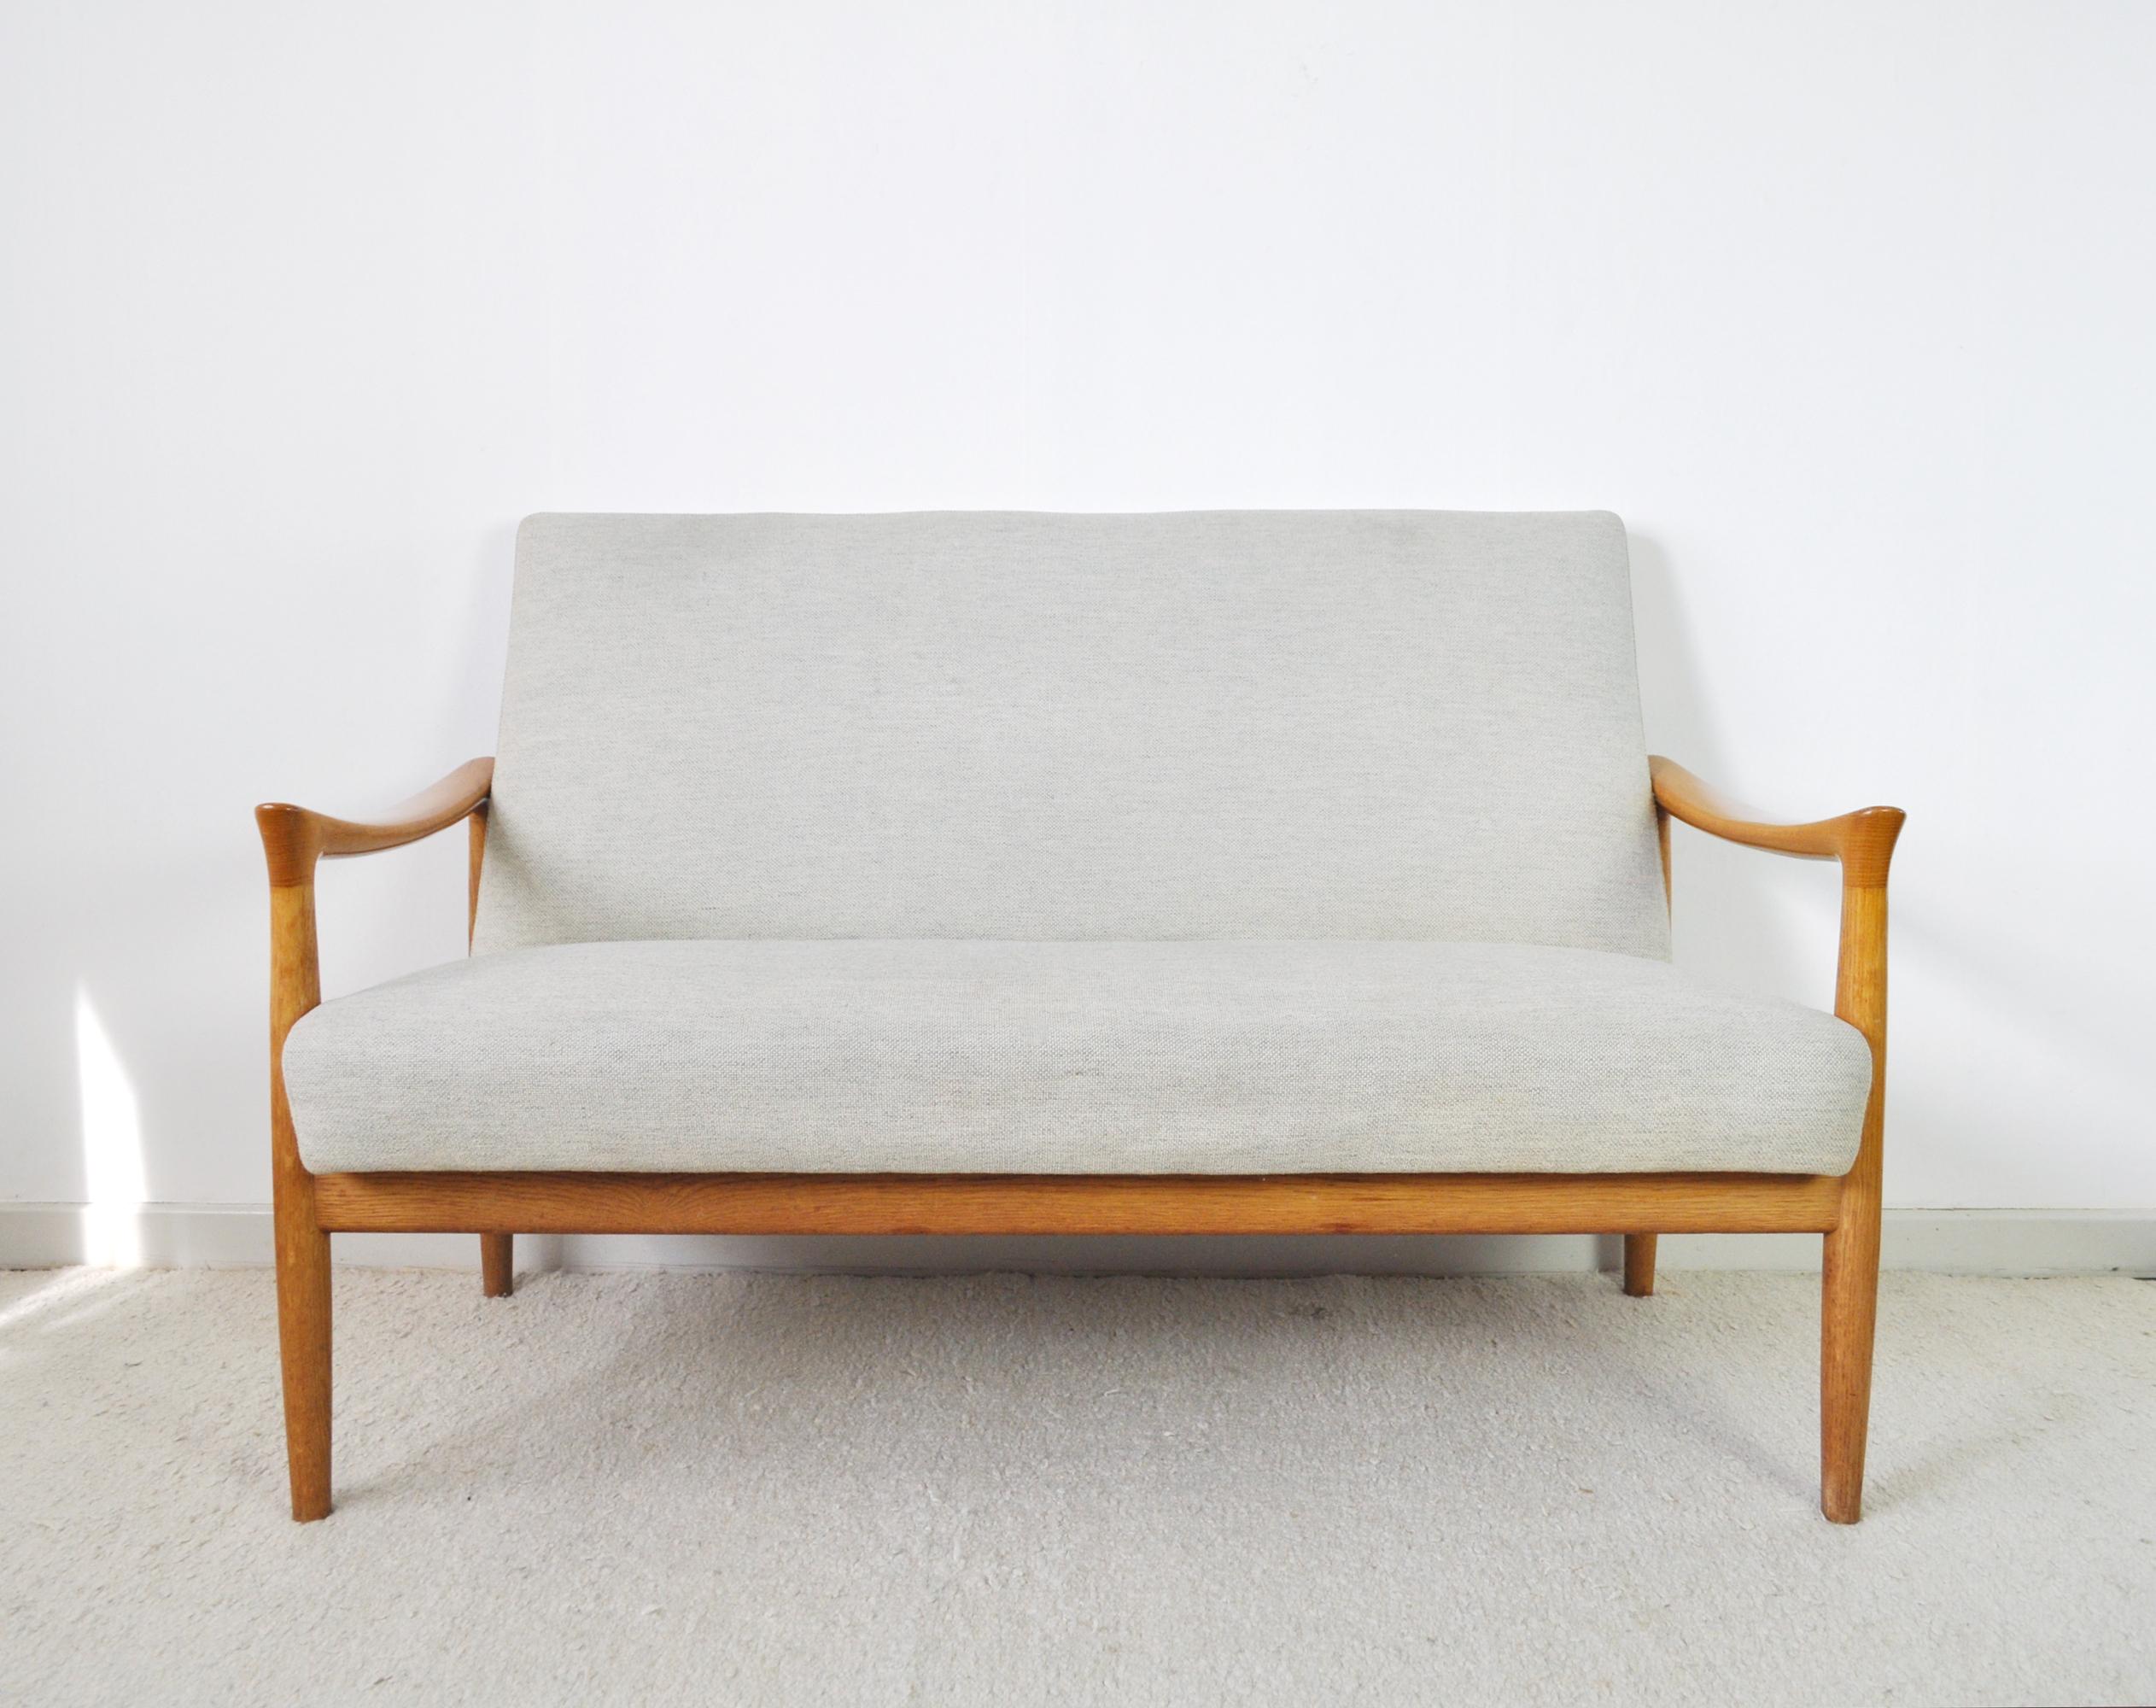 Rare Fritz Hansen sofa with fine Danish Modern design lines and details. Laquered solid oak frame and wool fabric. 
The overall condition is good. The original fabric shows wear (ask for more pictures). We recommend re-upholstering, and we are